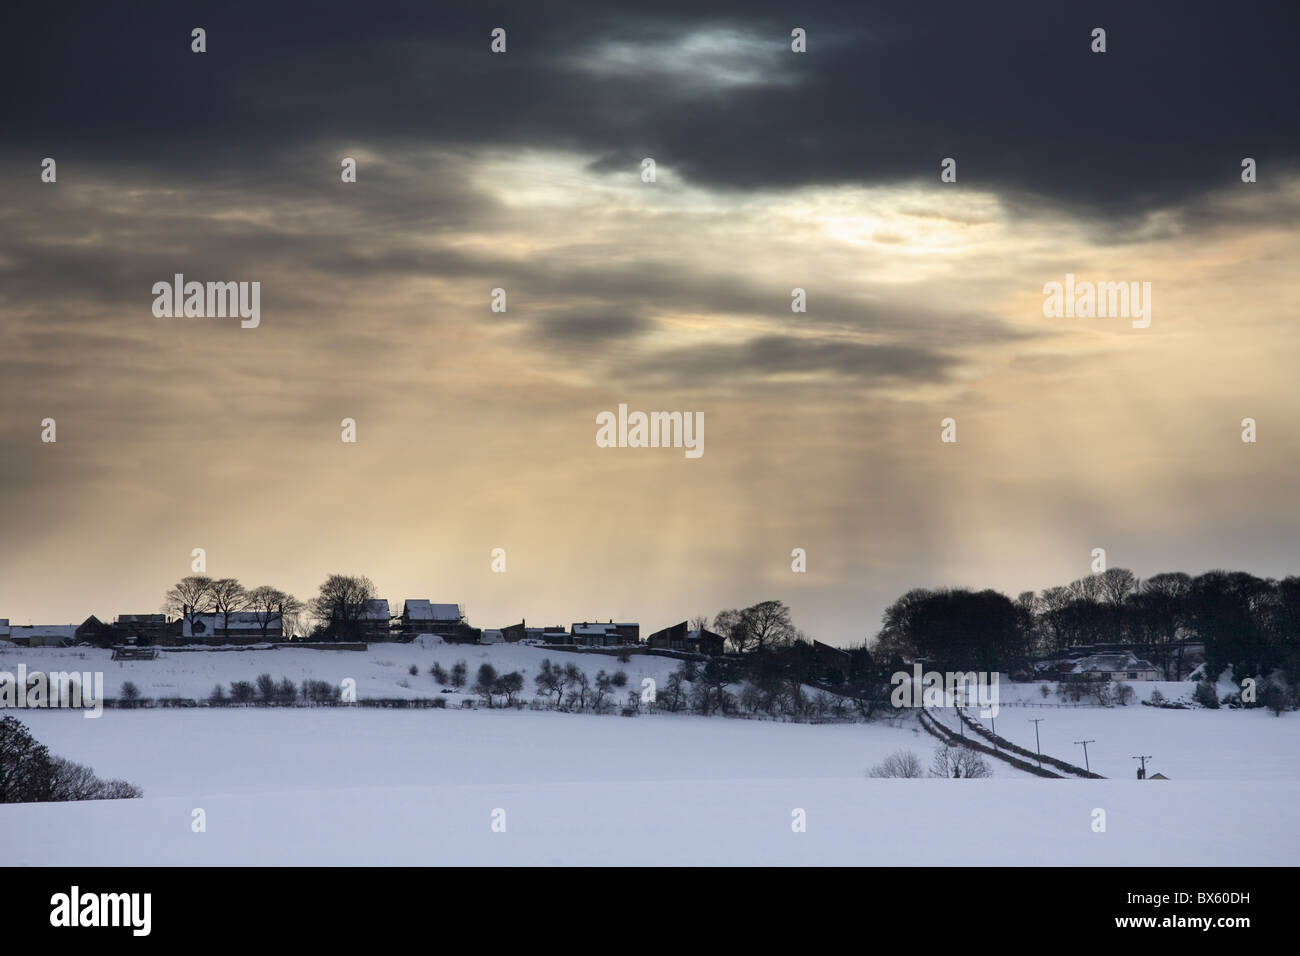 Light breaking through clouds above a snow covered landscape. Offerton, near Sunderland, Tyne and Wear, England, UK Stock Photo